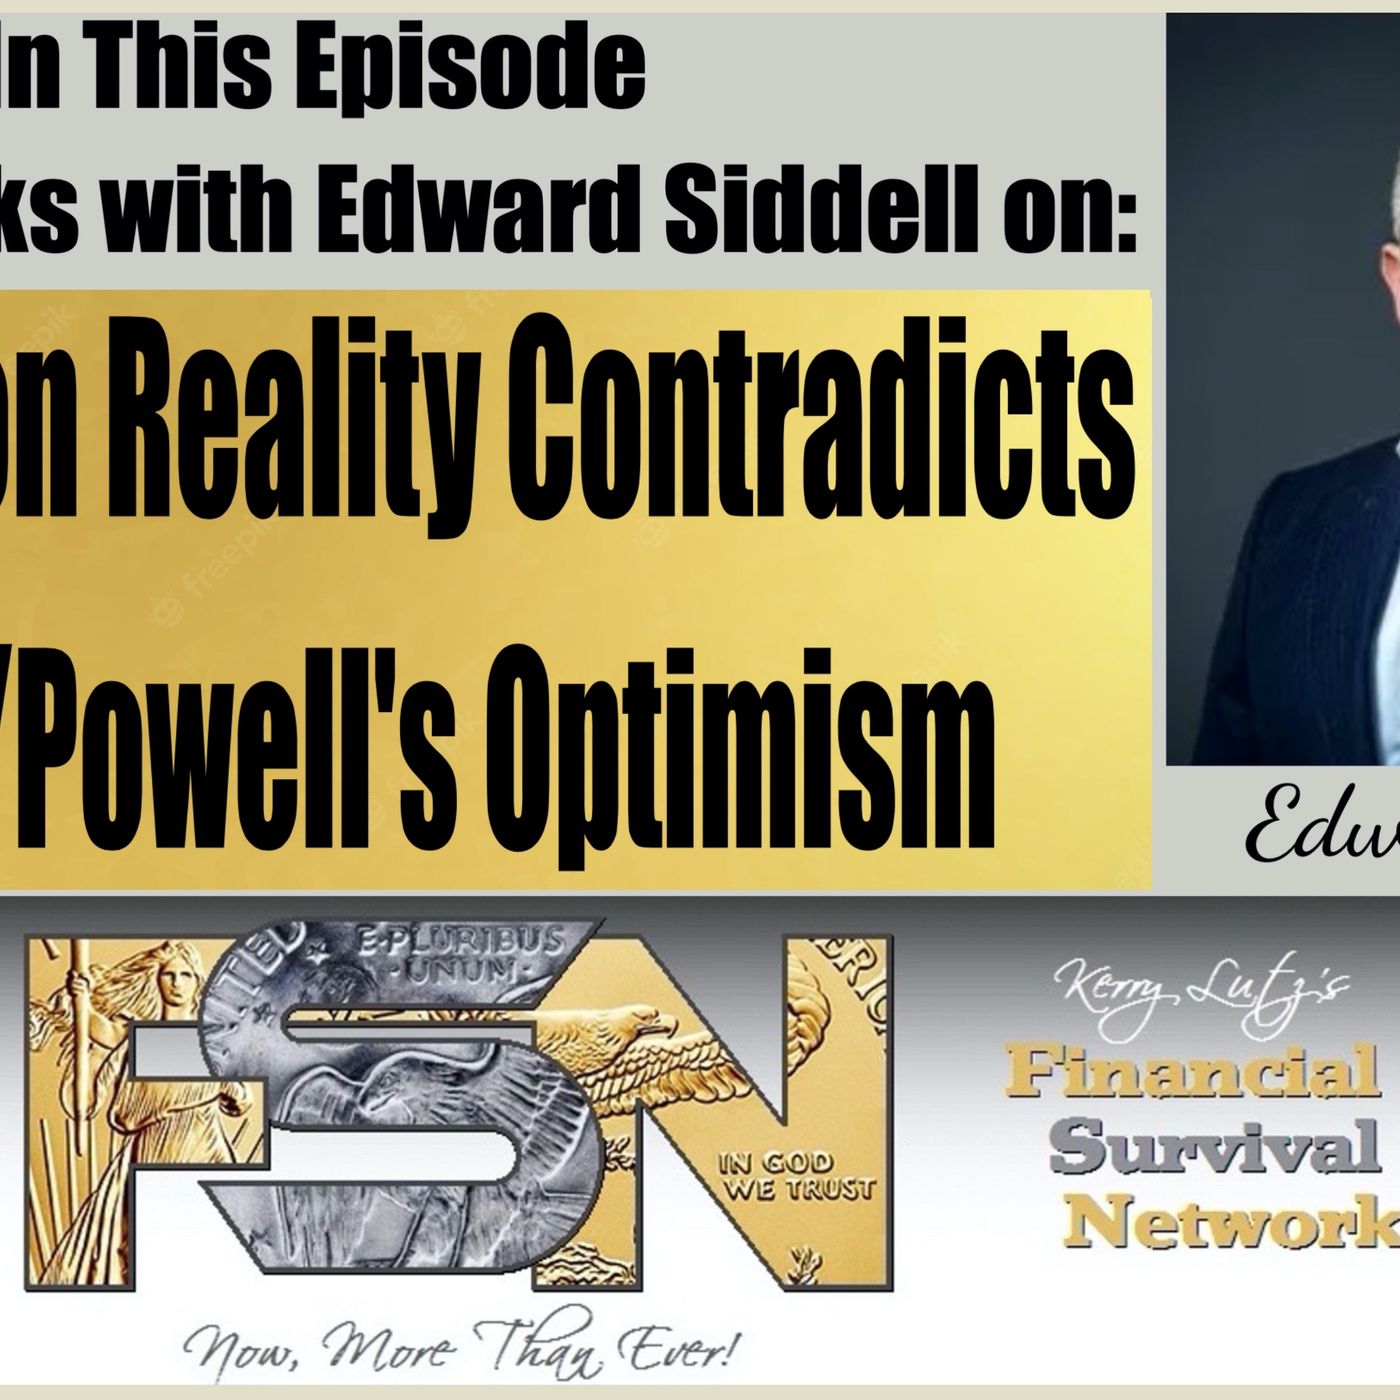 Stagflation Reality Contradicts Biden/Powell's Optimism with Ed Siddell #6065